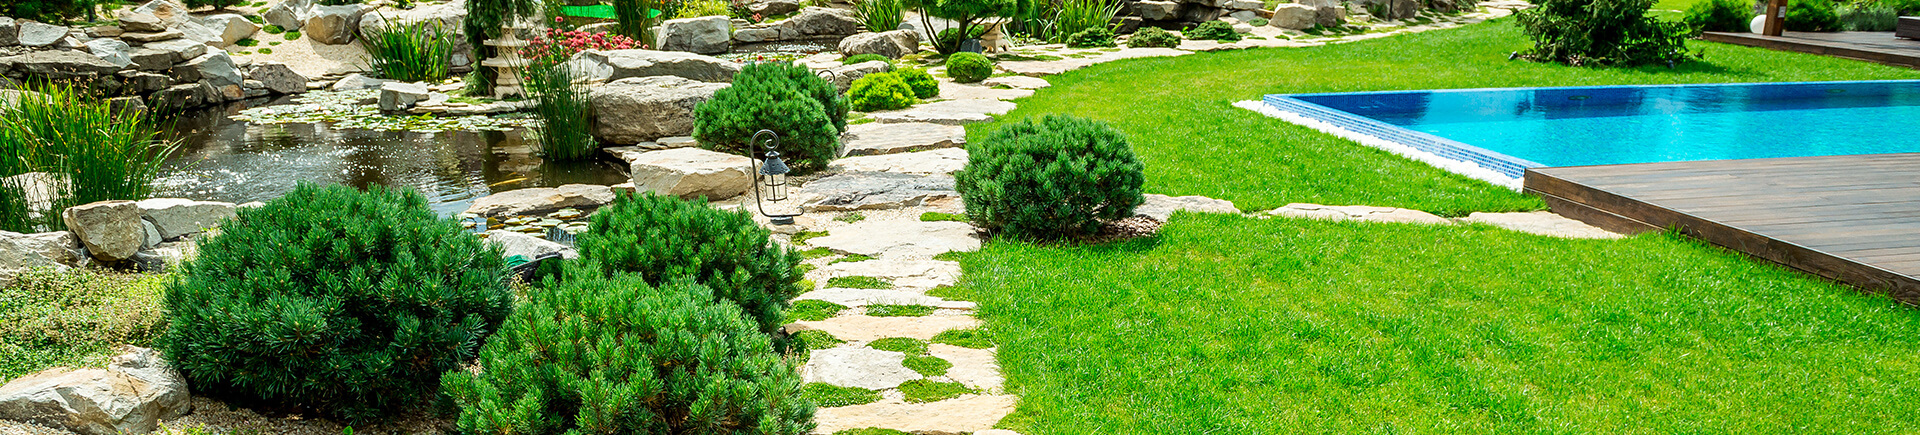 Lawn Service and Landscaping for Churches Decatur, GA